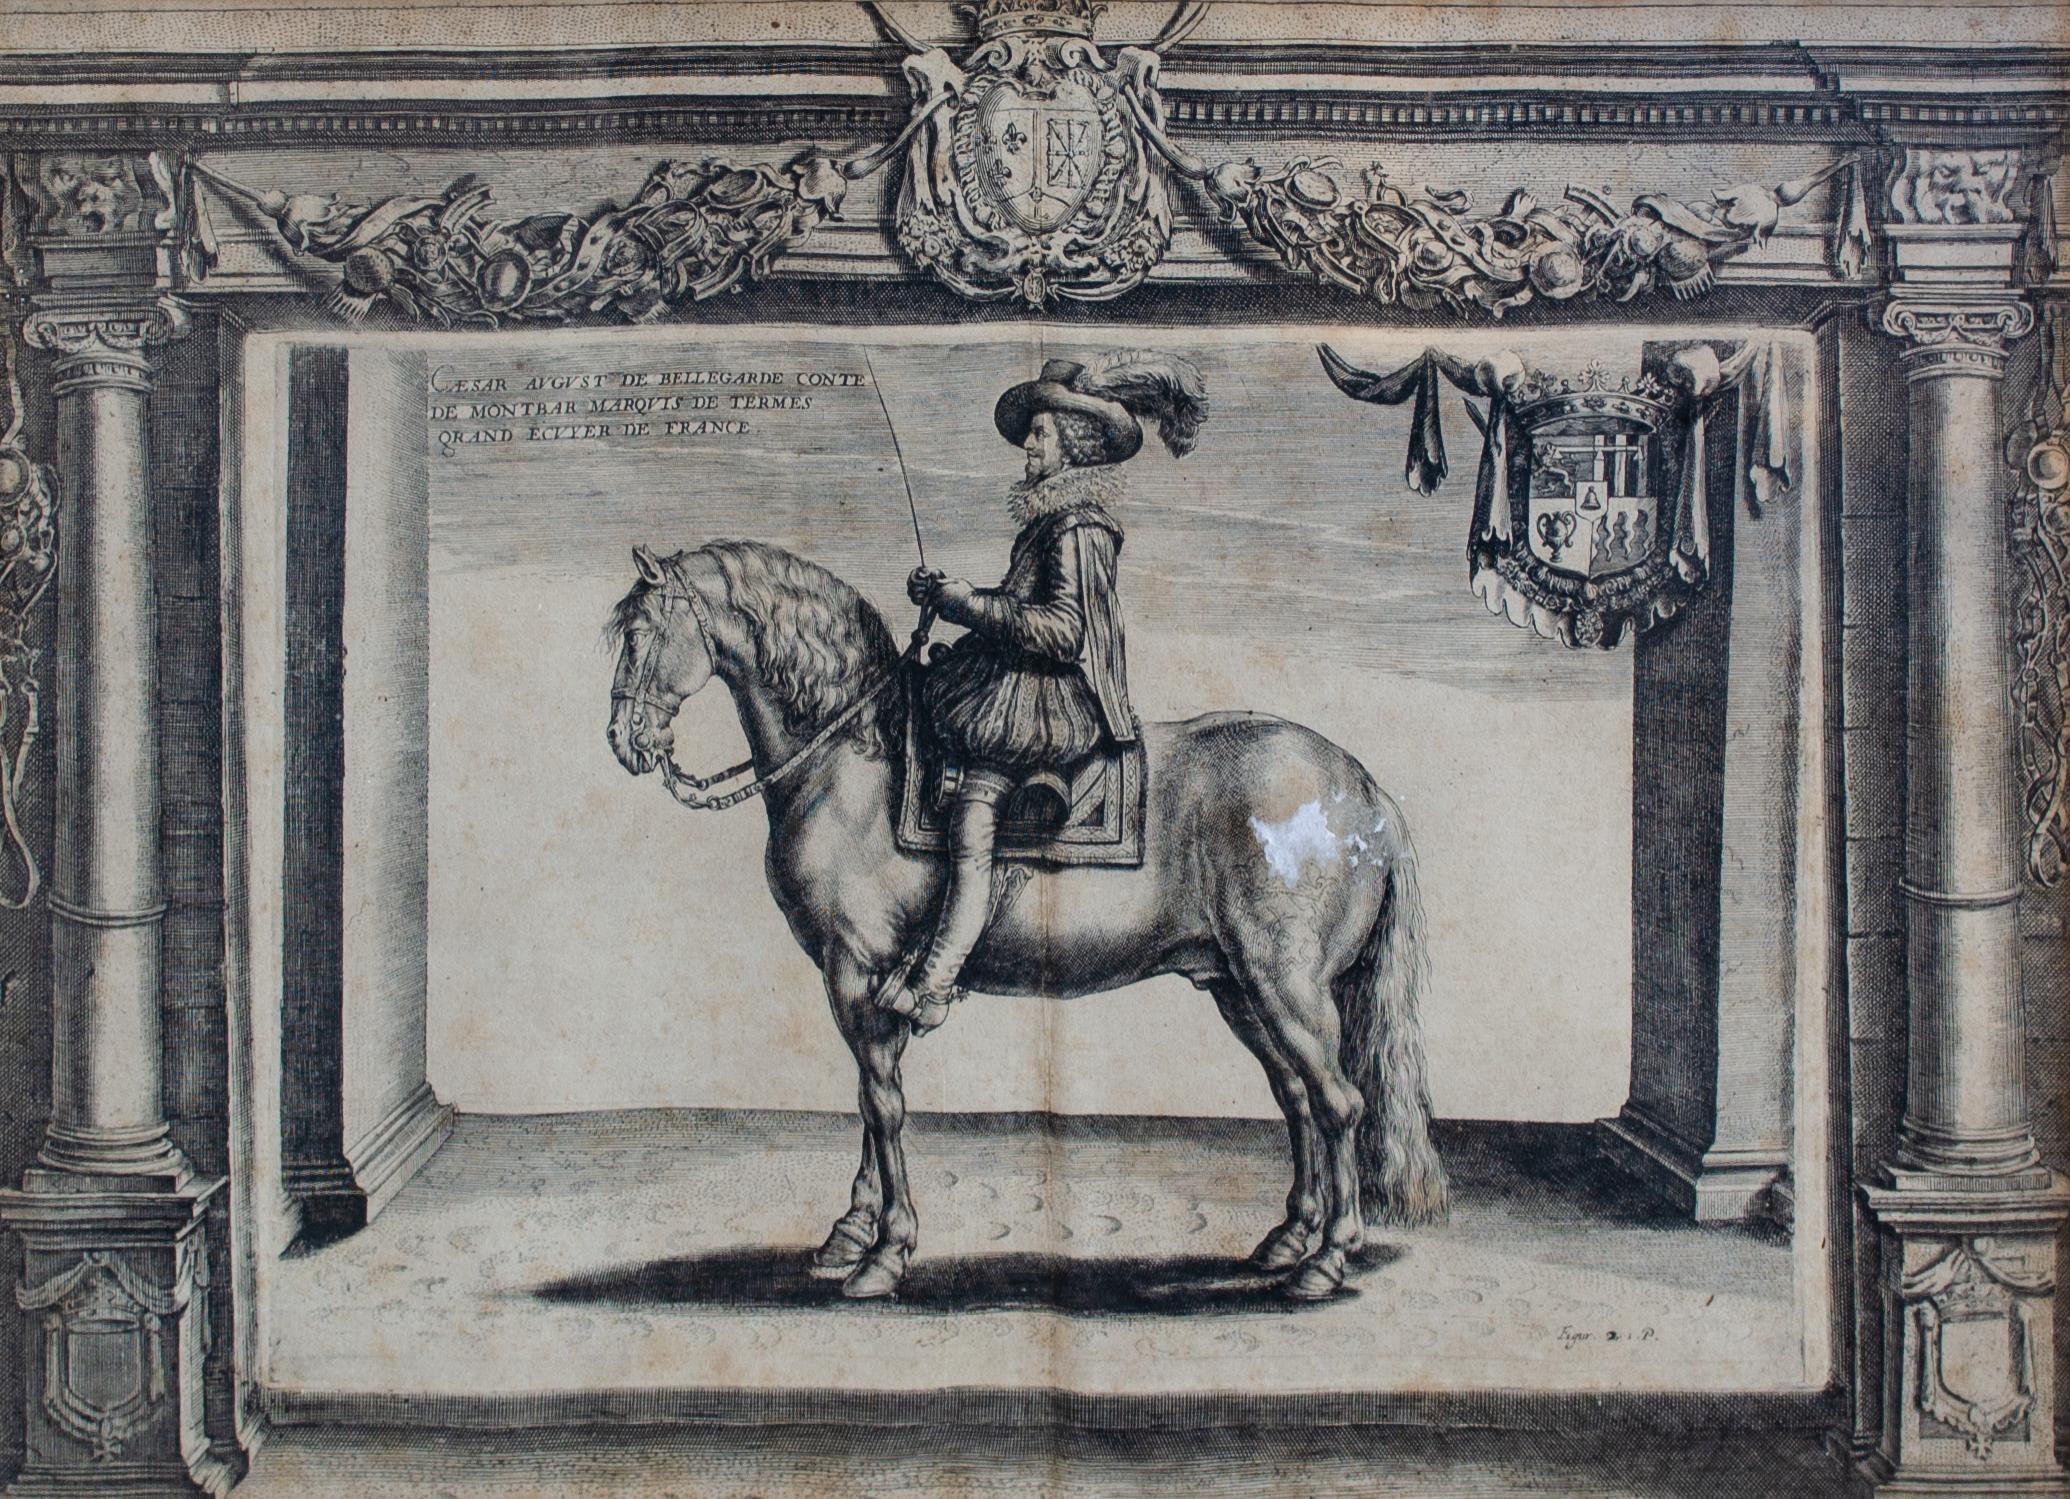 The Earl of Montbar, famous French horseman, Crispin de Passe Engraving